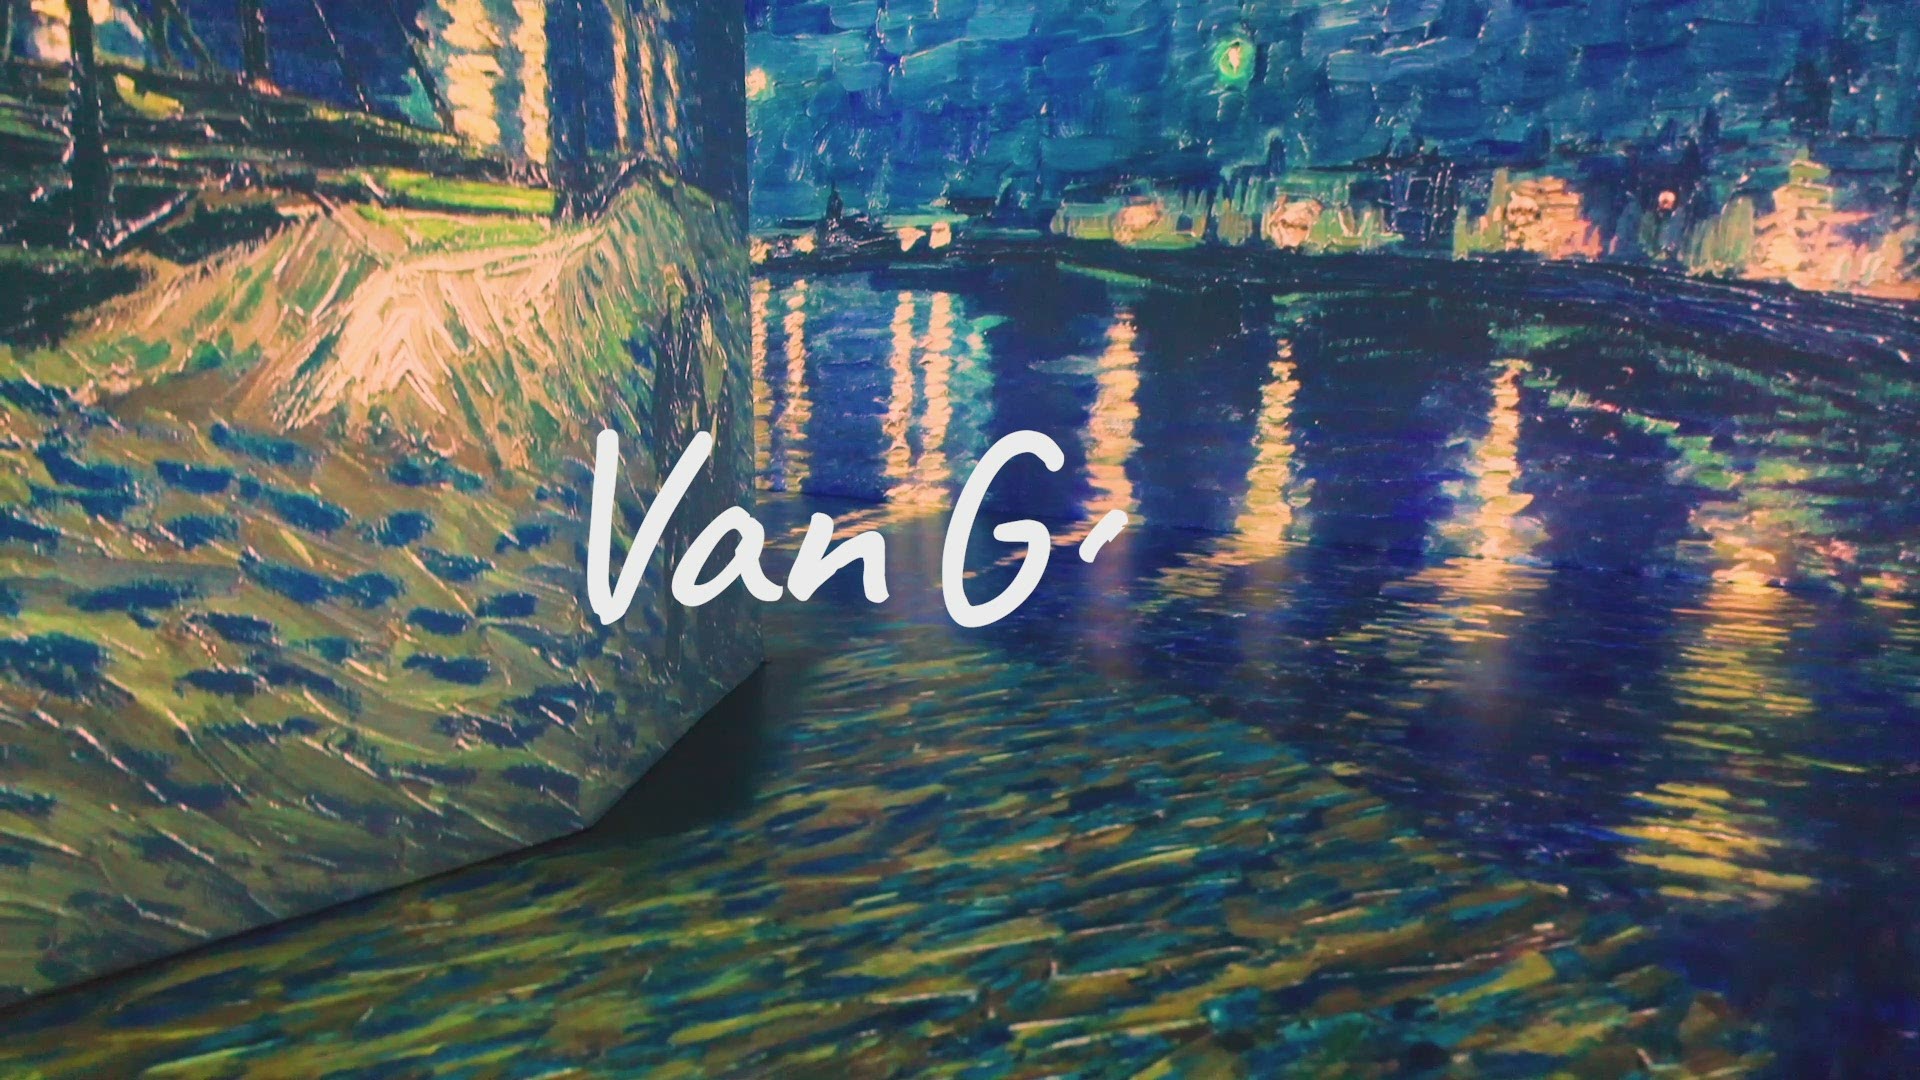 Beyond Van Gogh will be featured at the new Starry Night Pavilion on the grounds of the Saint Louis Galleria this fall. Video provided by: Beyond Van Gogh